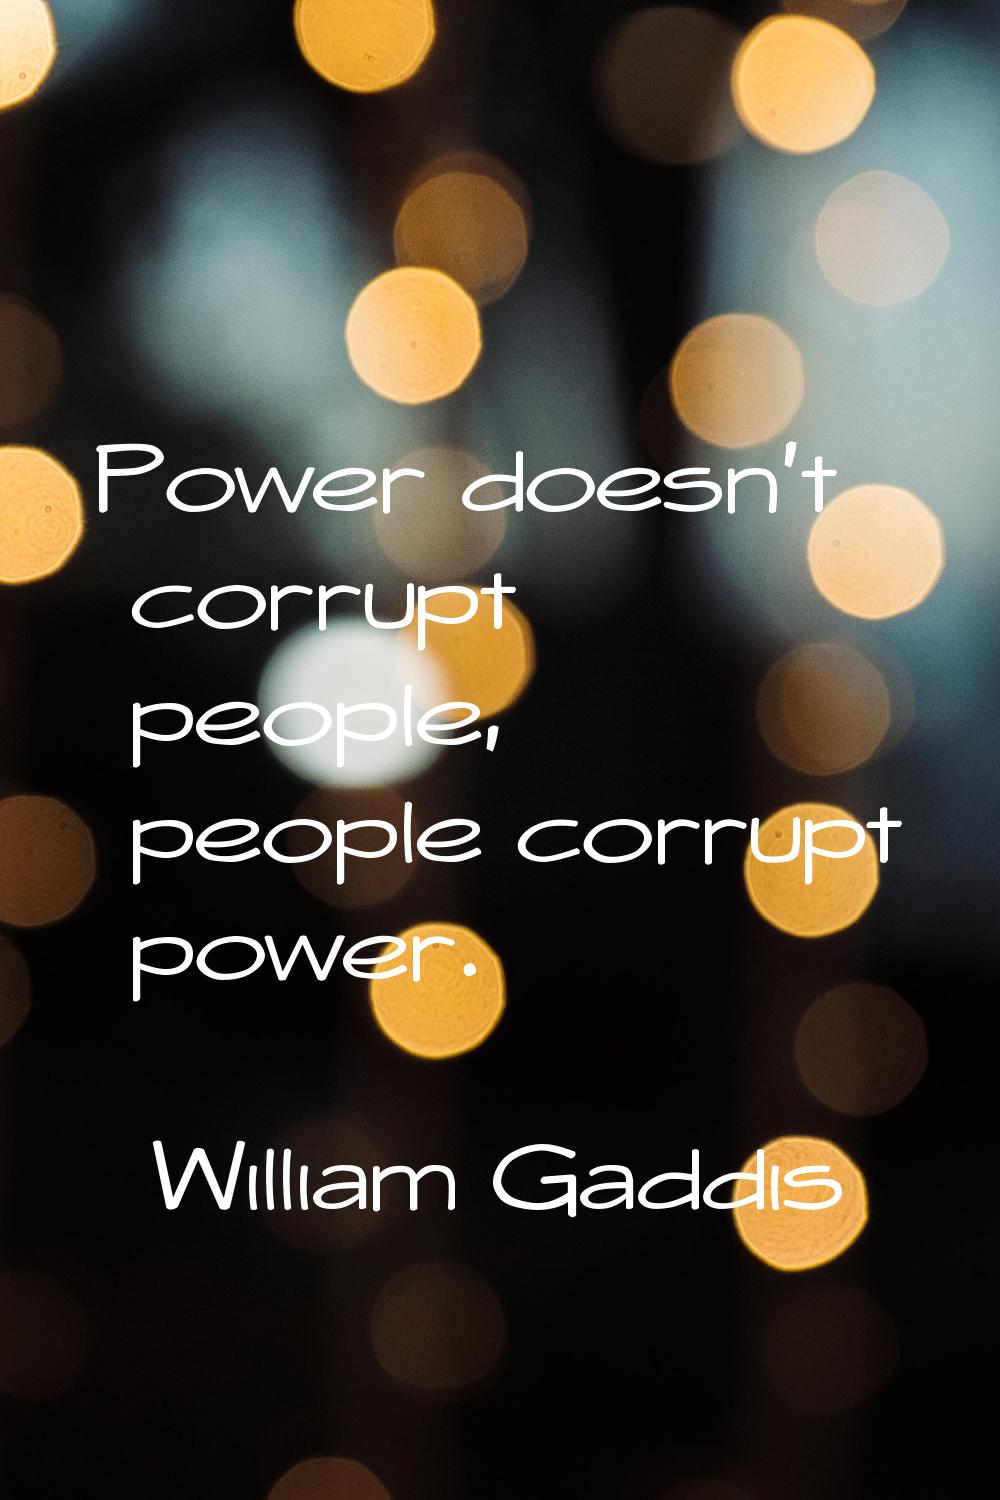 Power doesn't corrupt people, people corrupt power.